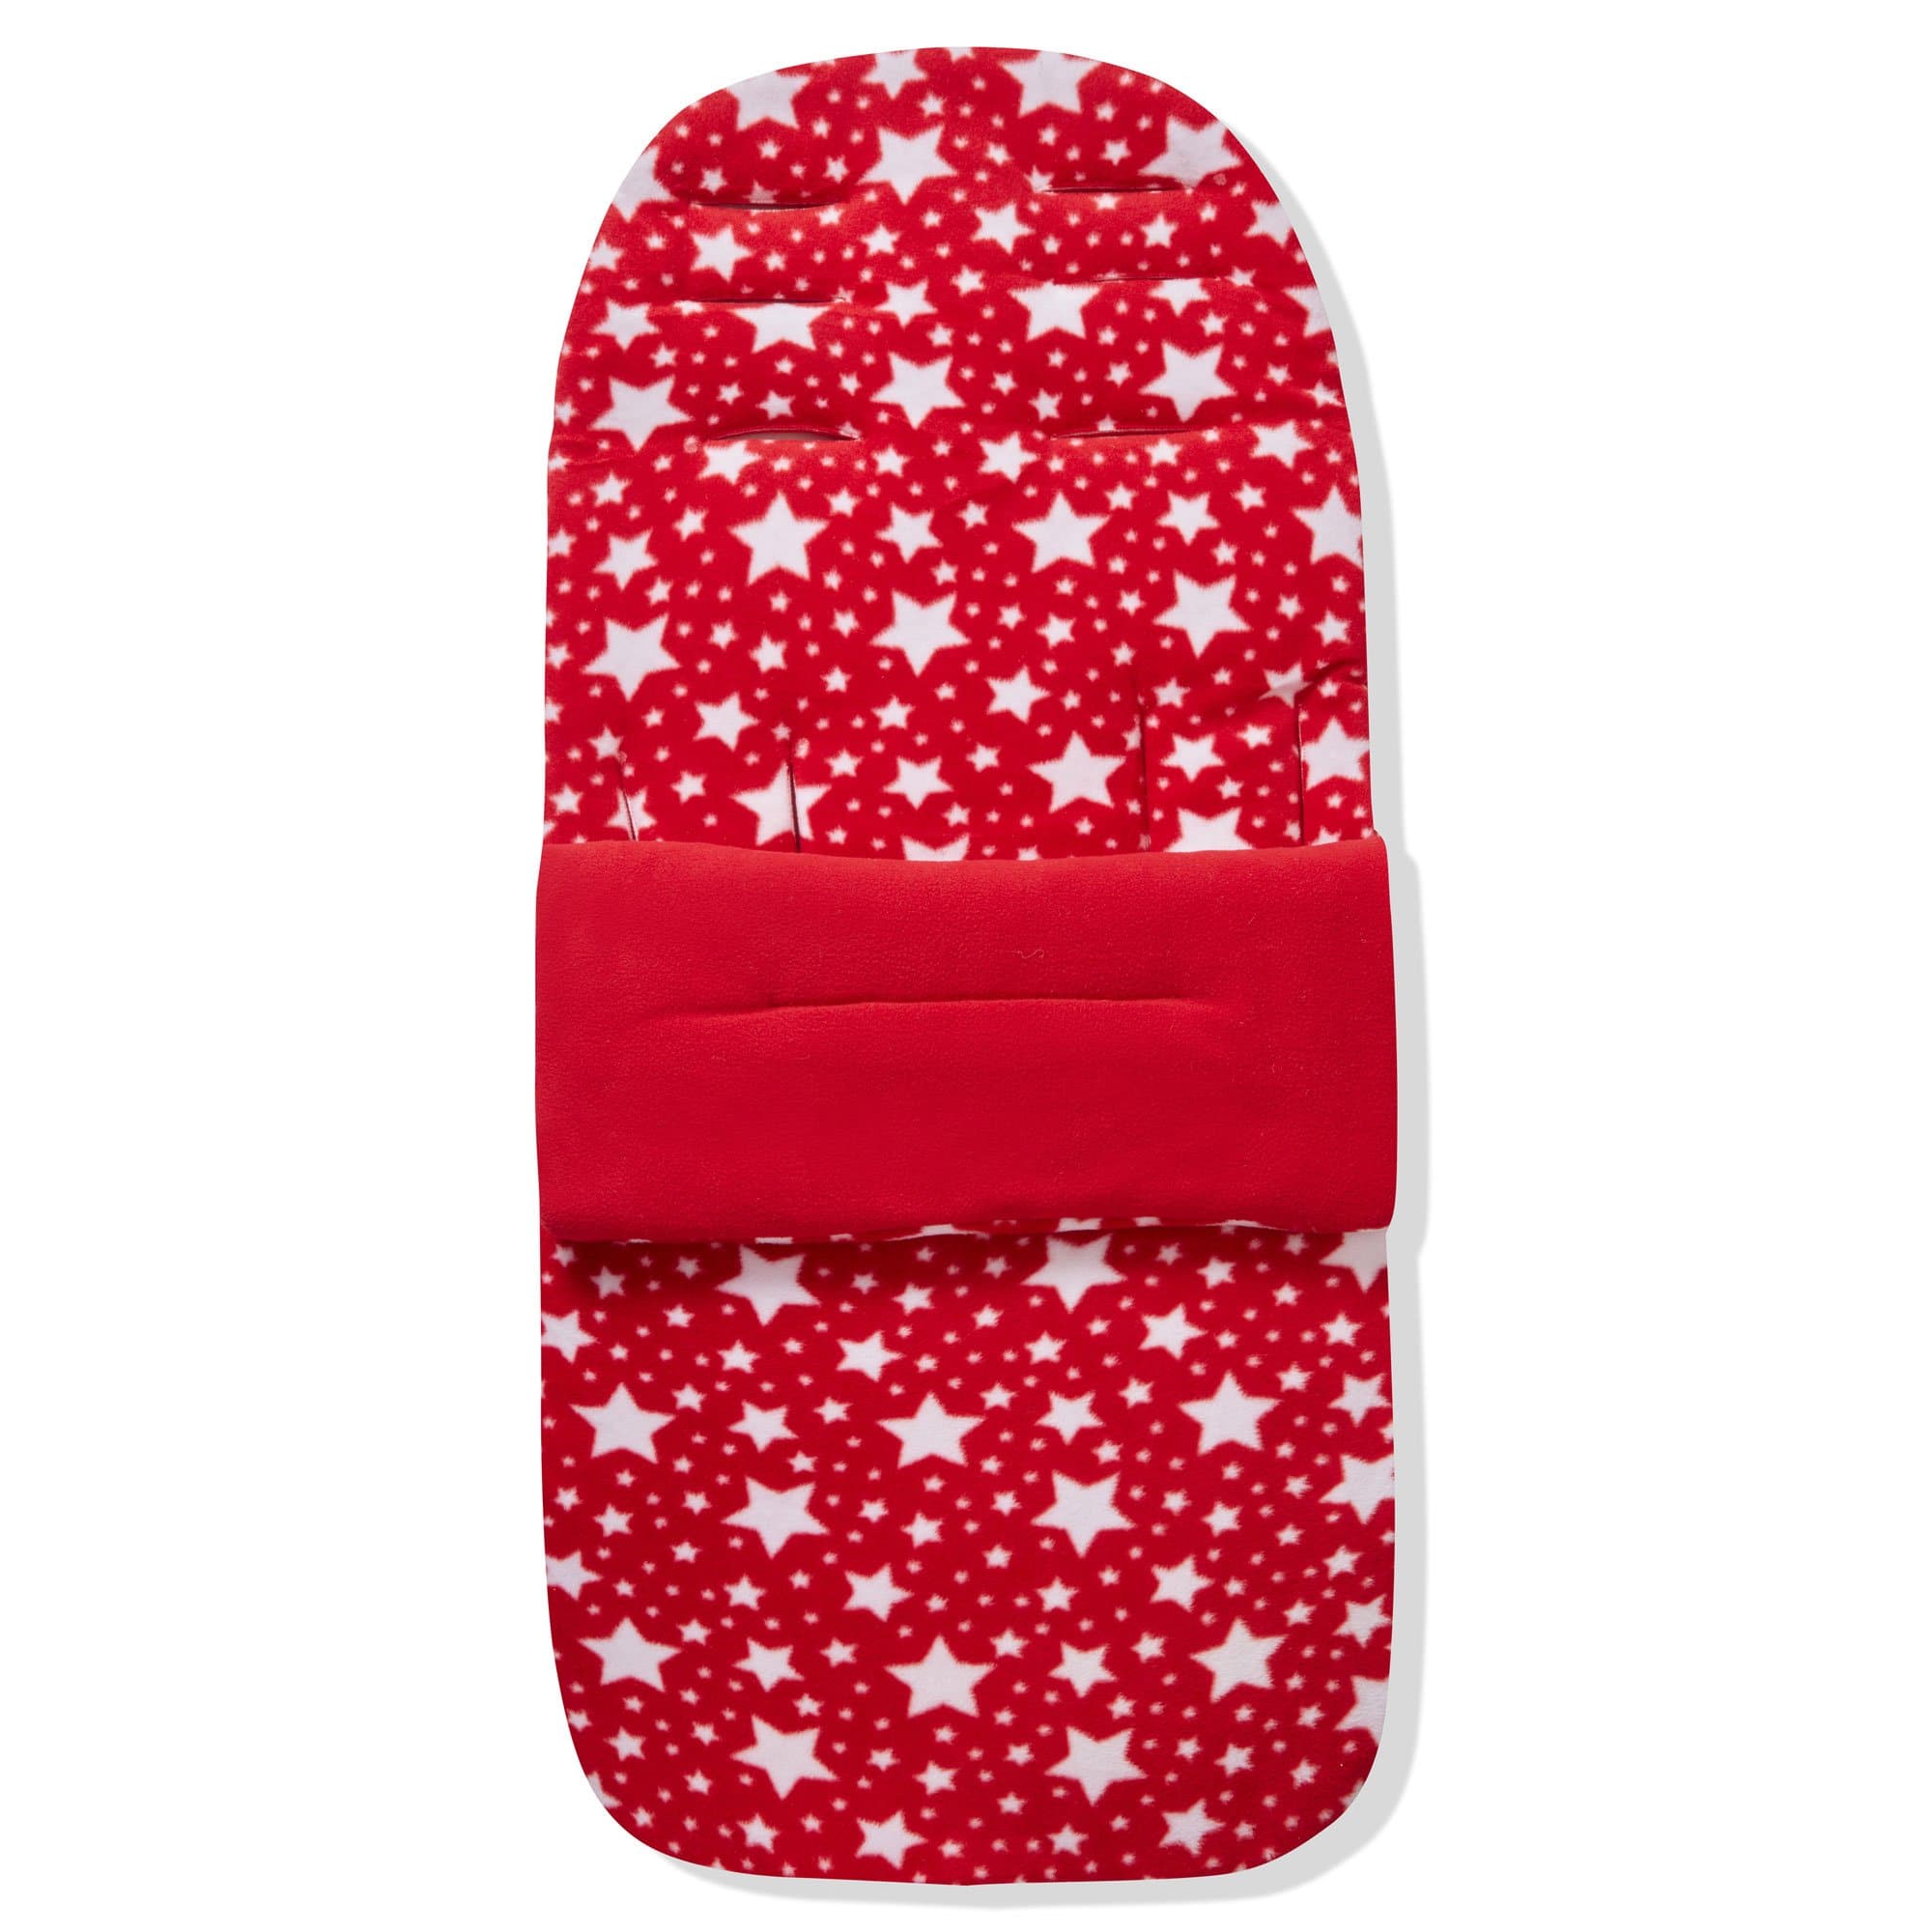 Fleece Footmuff / Cosy Toes Compatible with BabiesRus - For Your Little One